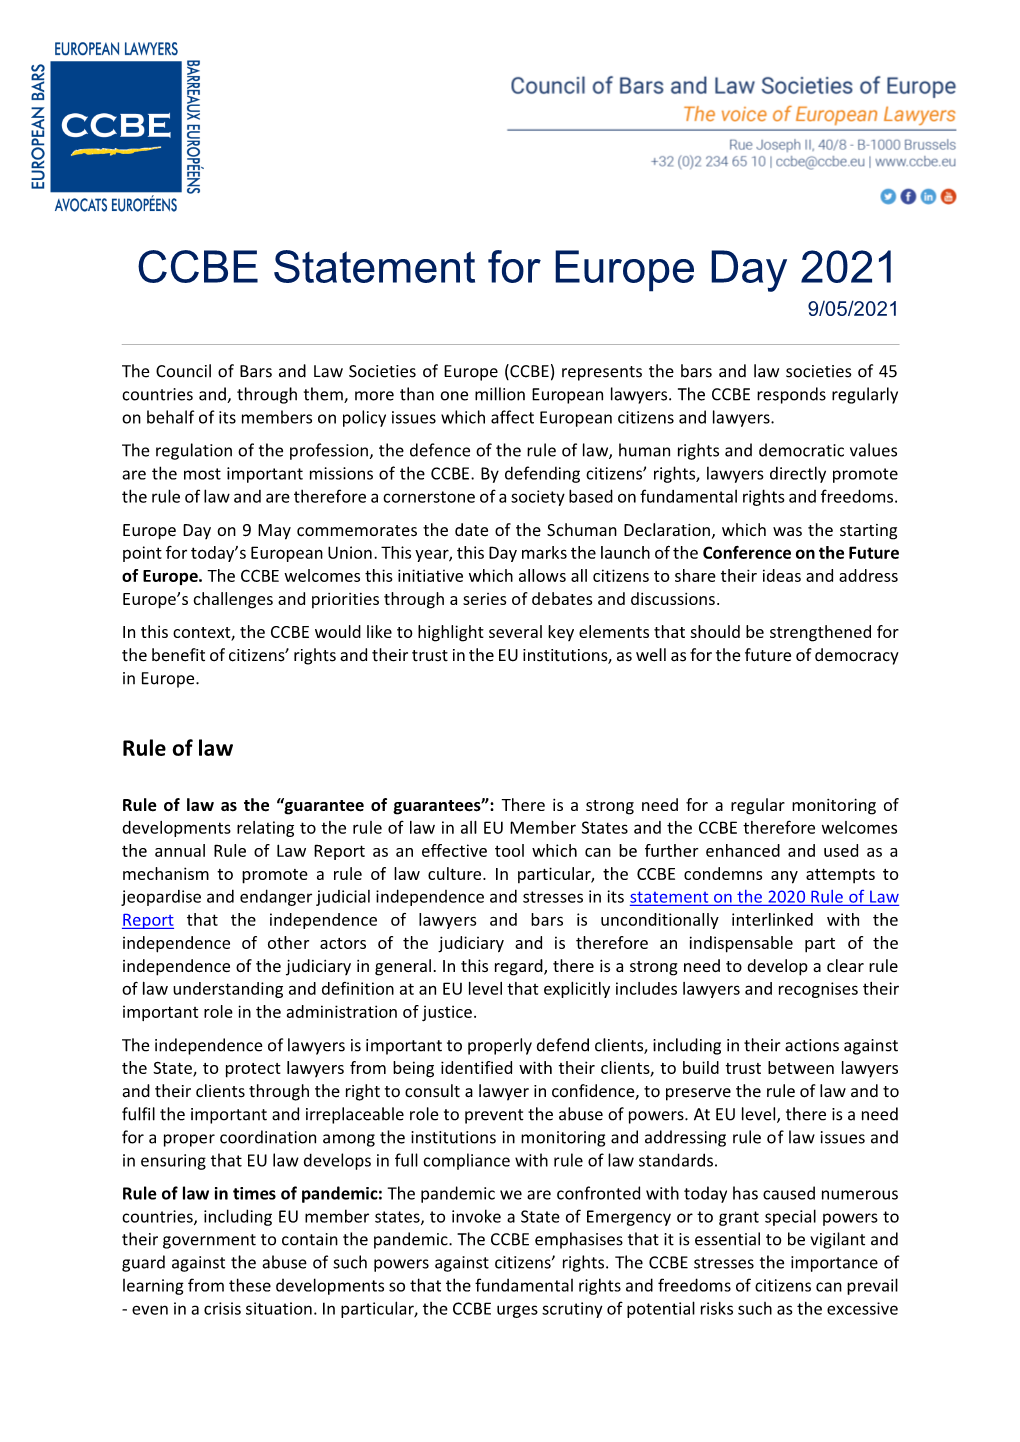 CCBE Statement for Europe Day 2021 9/05/2021